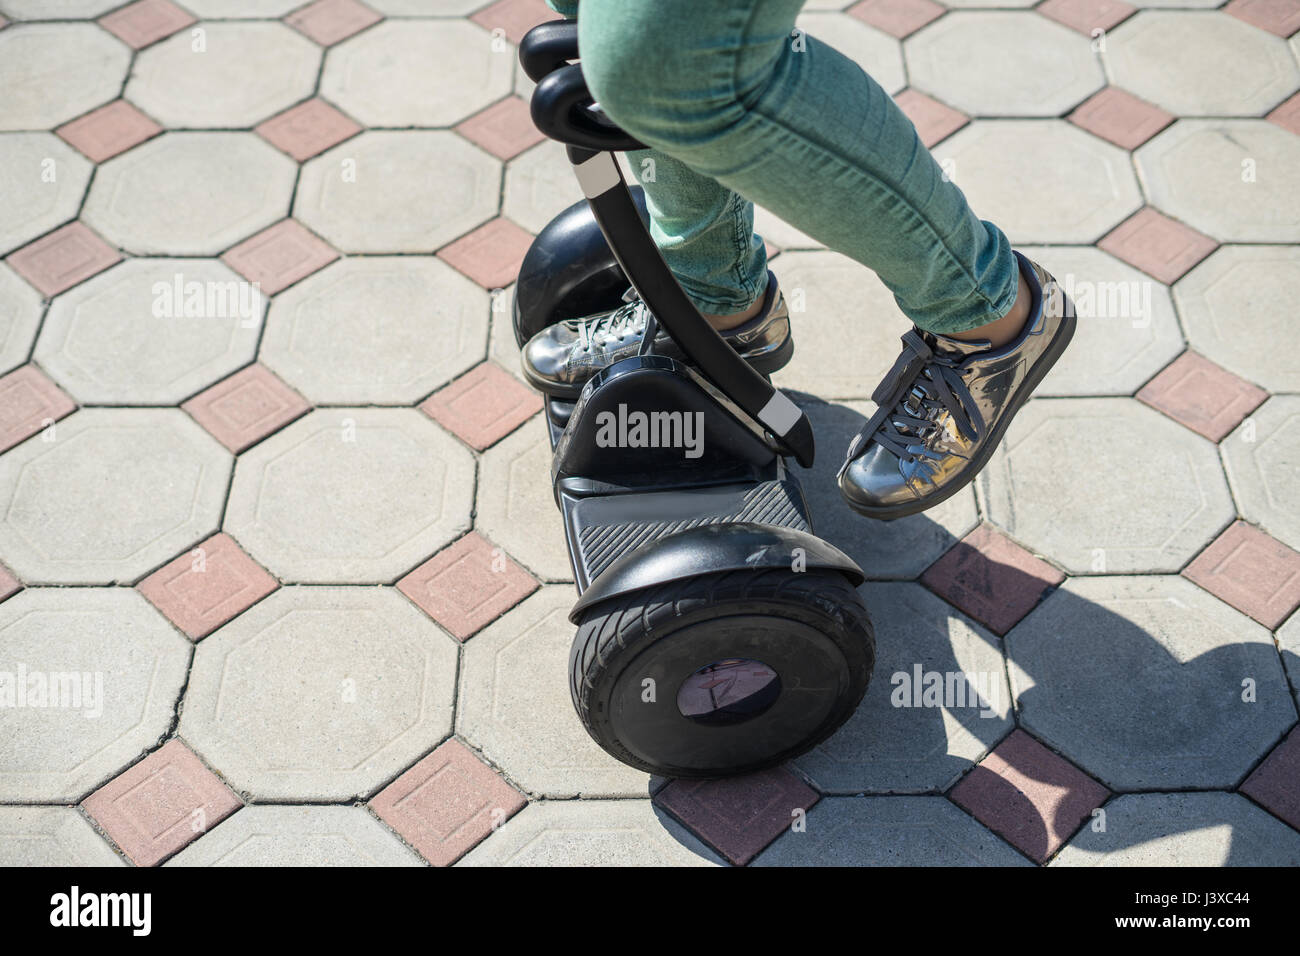 woman legs start riding gyroscooter or hoverboard Stock Photo